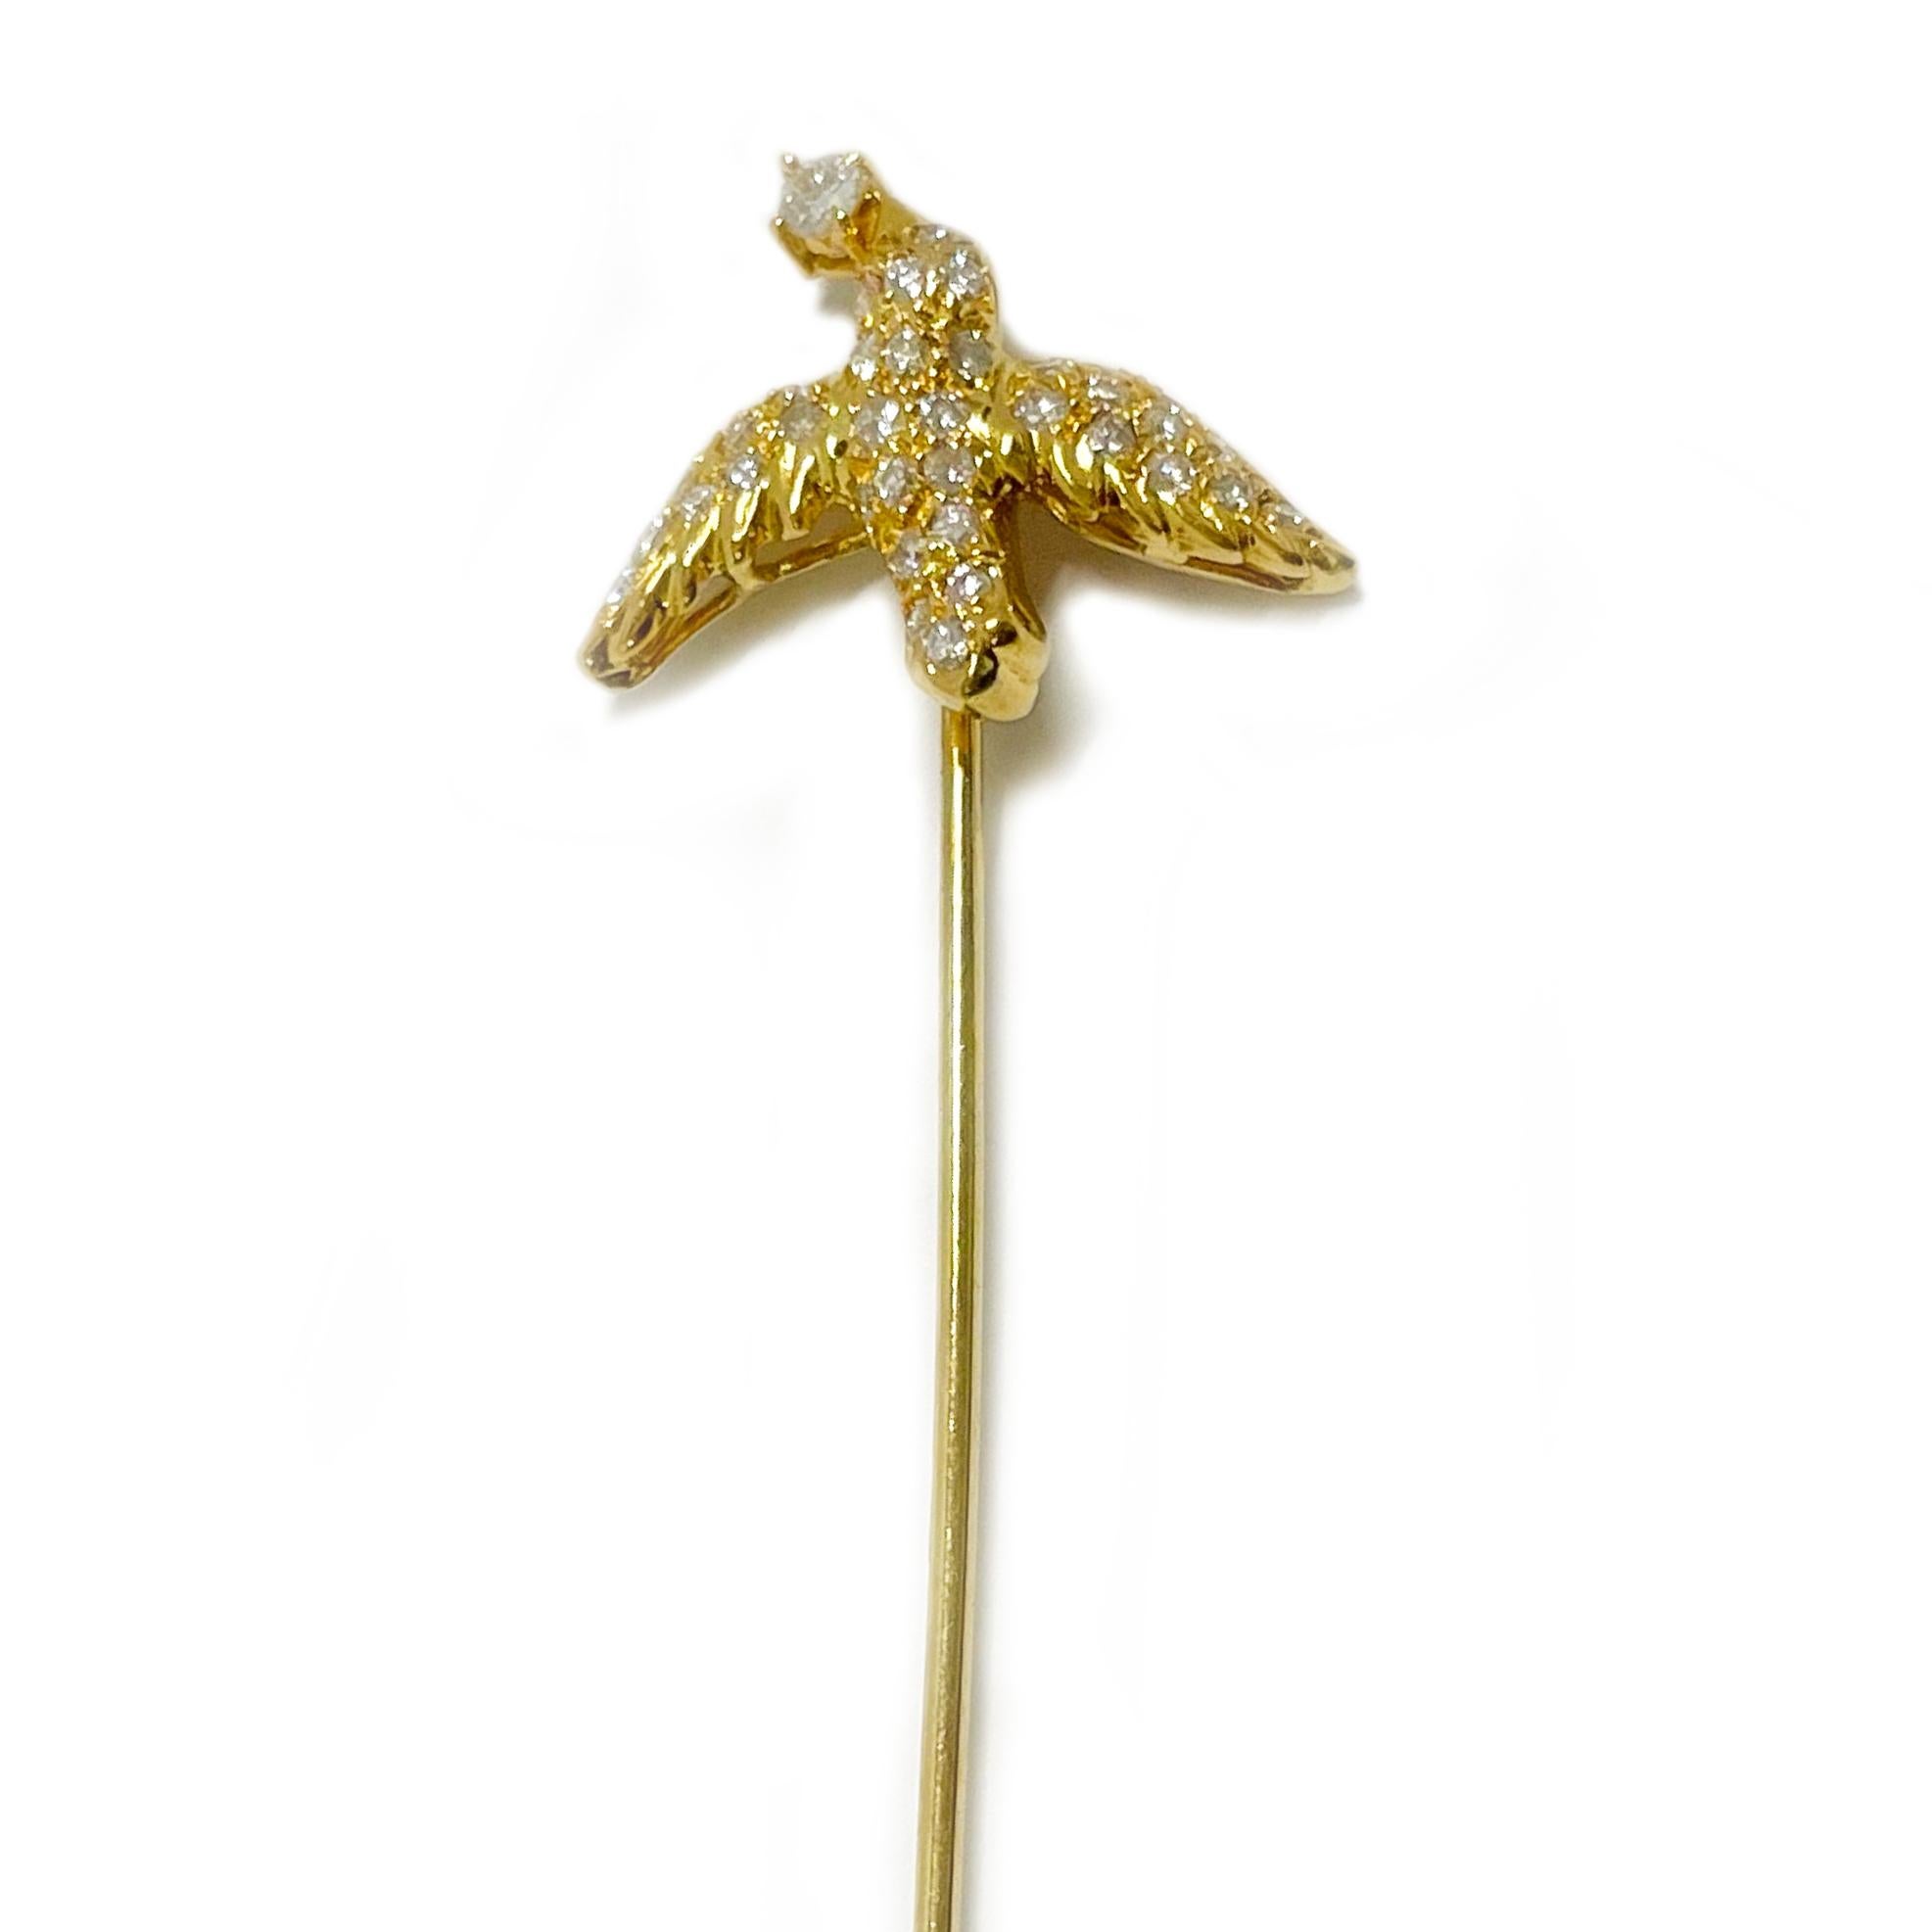 Tested 18 Karat Yellow Gold Diamond Bird Stick Pin. This adorable pin features thirty-nine brilliant -cut round diamonds set on the bird body, wings, and head. There is one 2.6mm diamond and thirty-eight 1.72mm diamonds for a total carat weight of